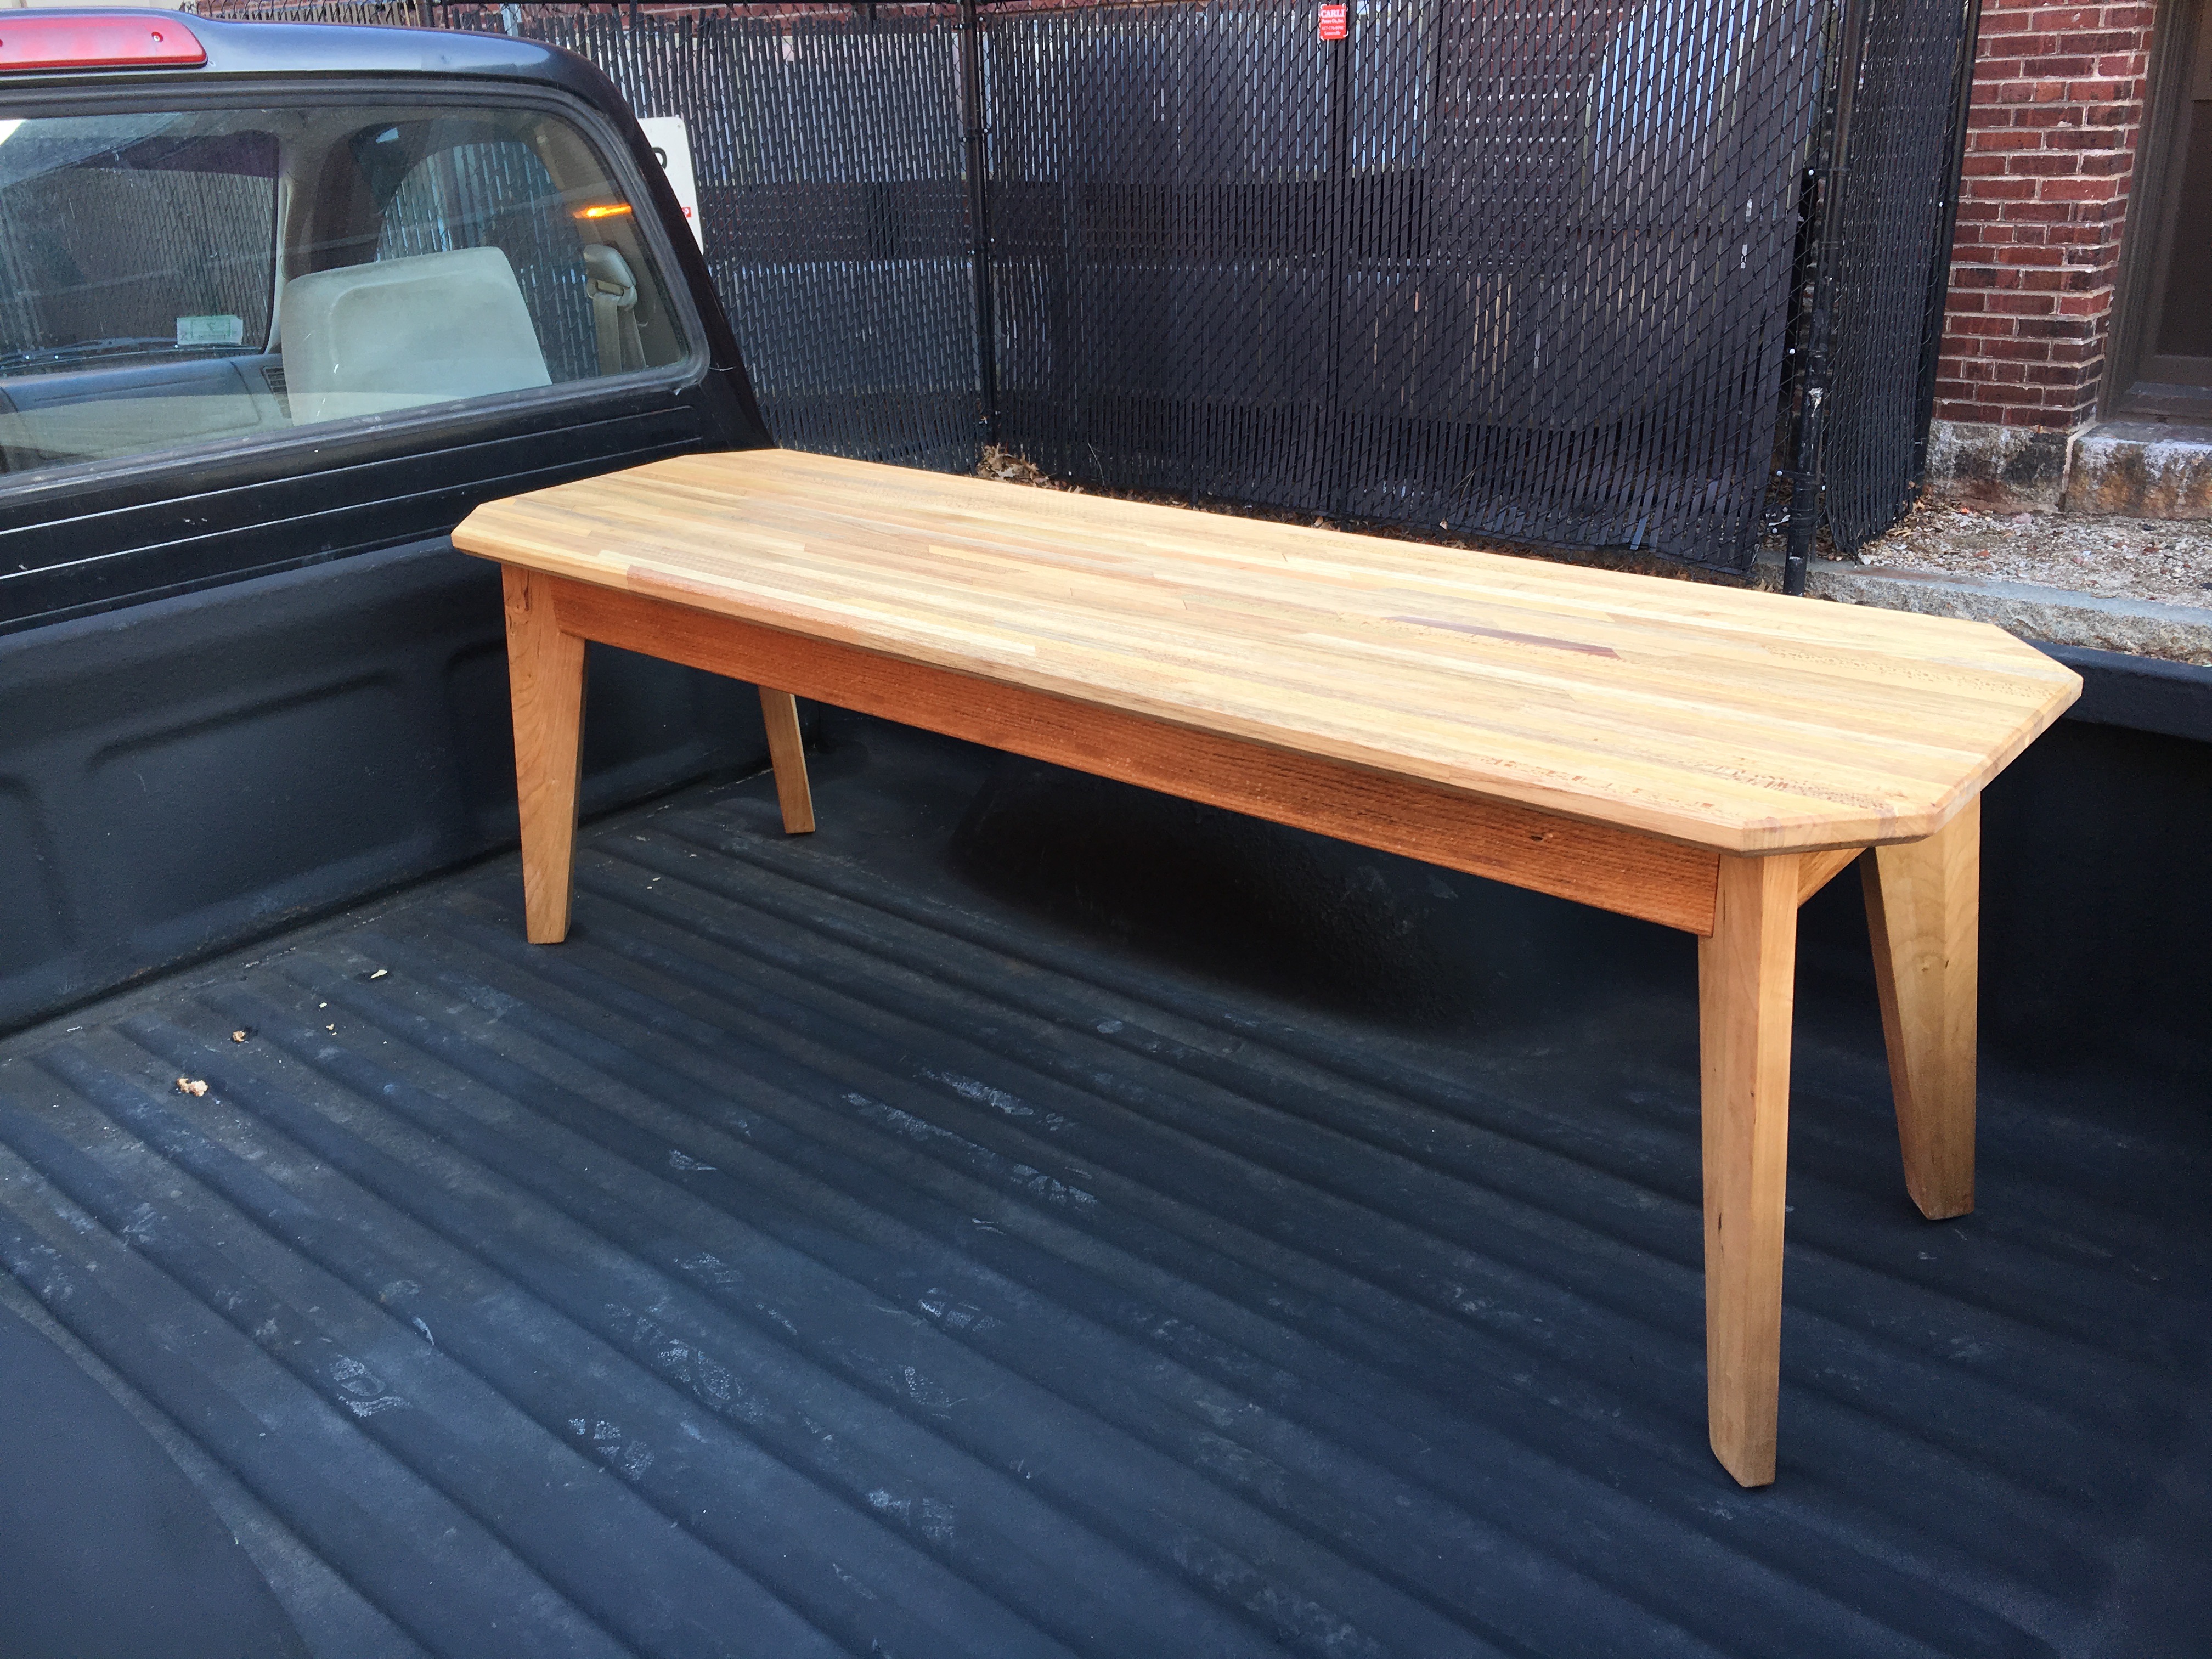 Coffee table from recycled pallet wood. Pictured here in an uncharacteristically clean truck. 